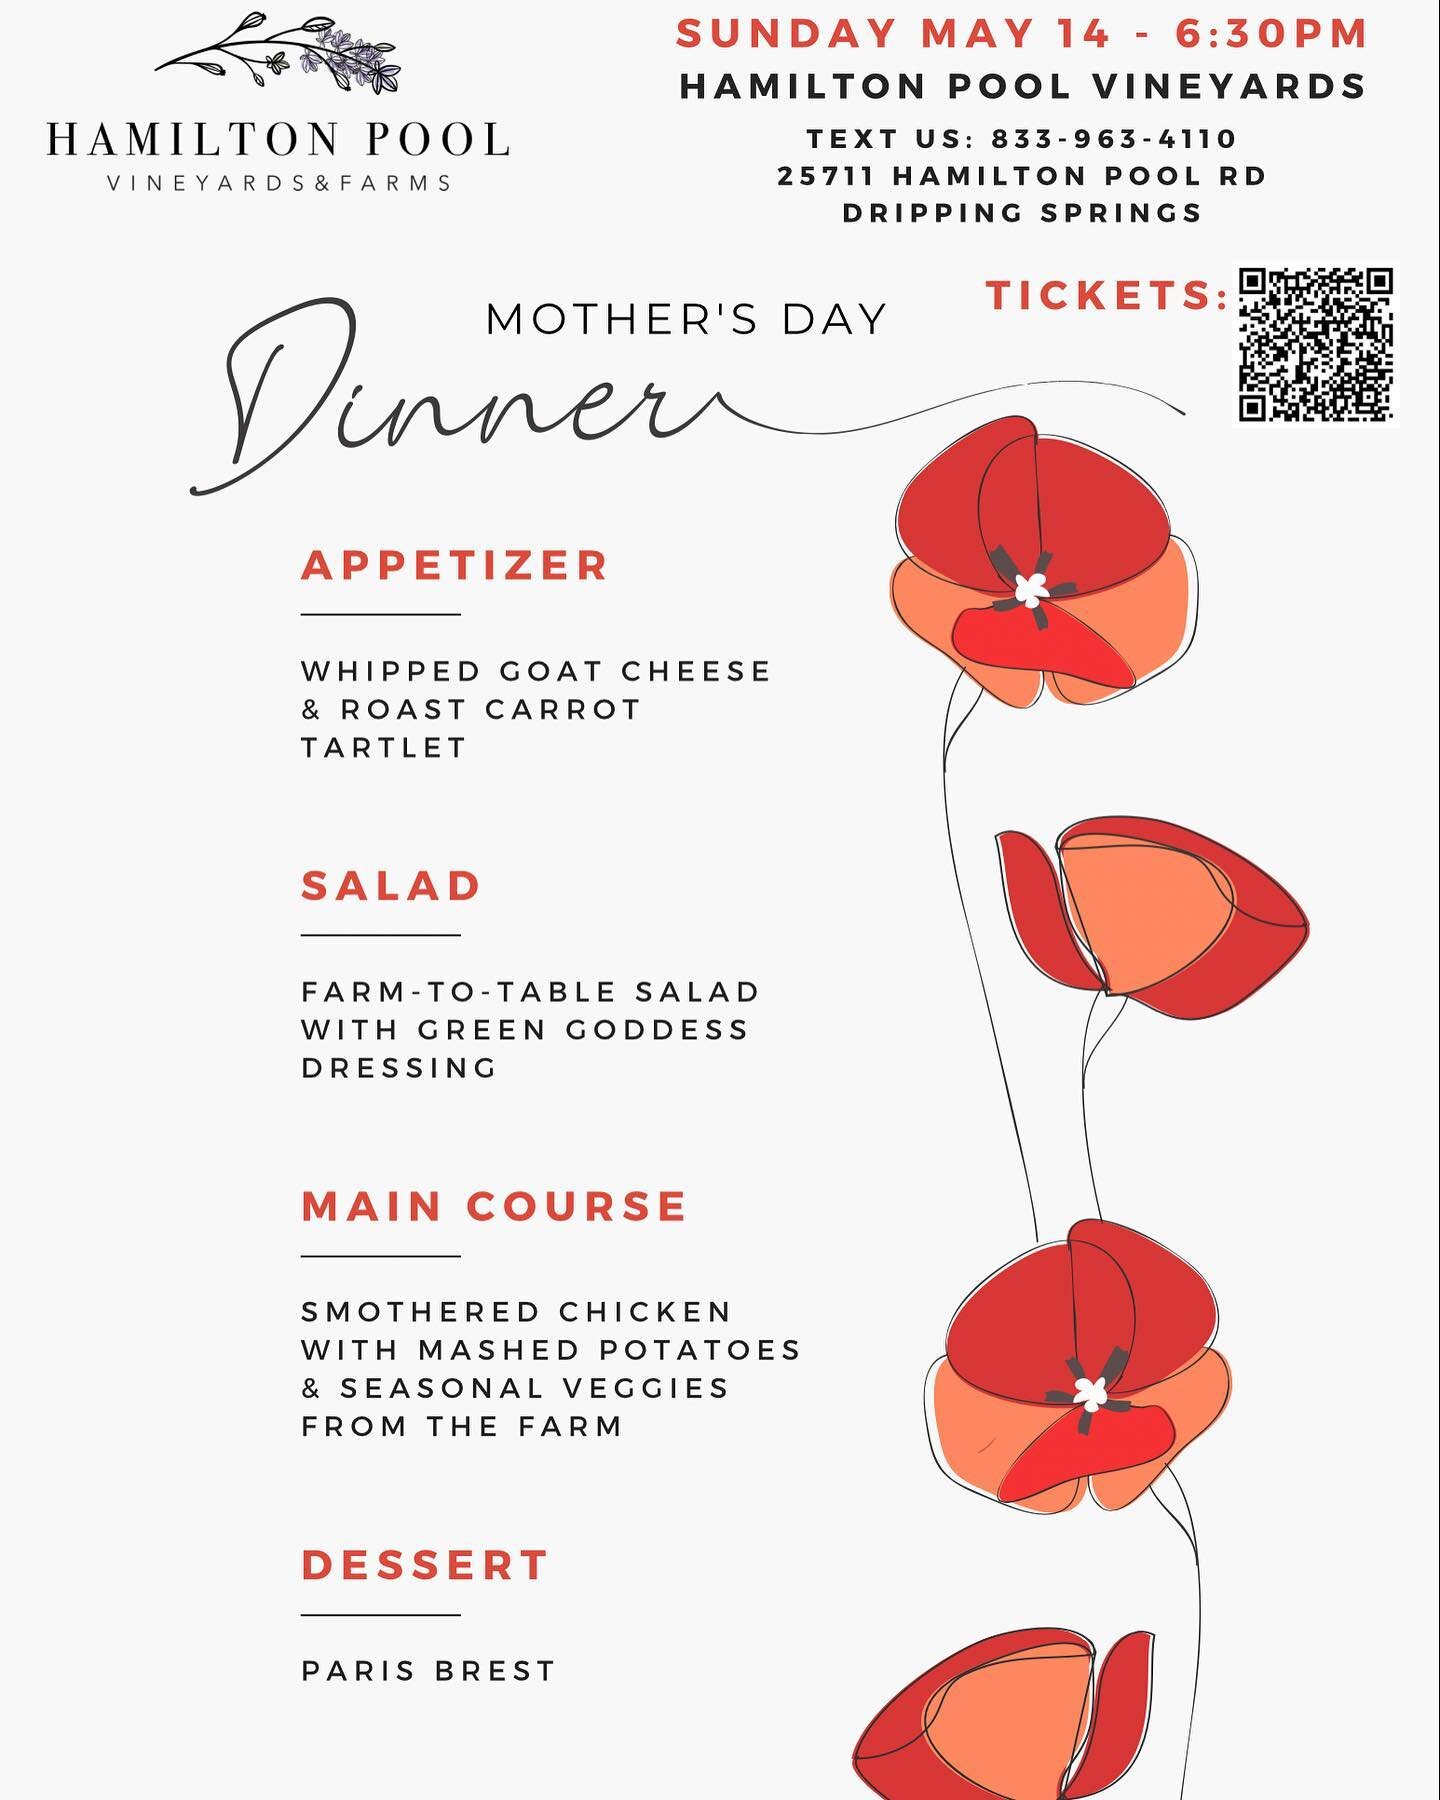 Life doesn&rsquo;t come with a manual, it comes with a mother. - Unknown 

Join us at the Vineyard to celebrate Mom with an elegant dining experience inspired by organic ingredients from our farm and great Texas wines, surrounded by the beauty of the